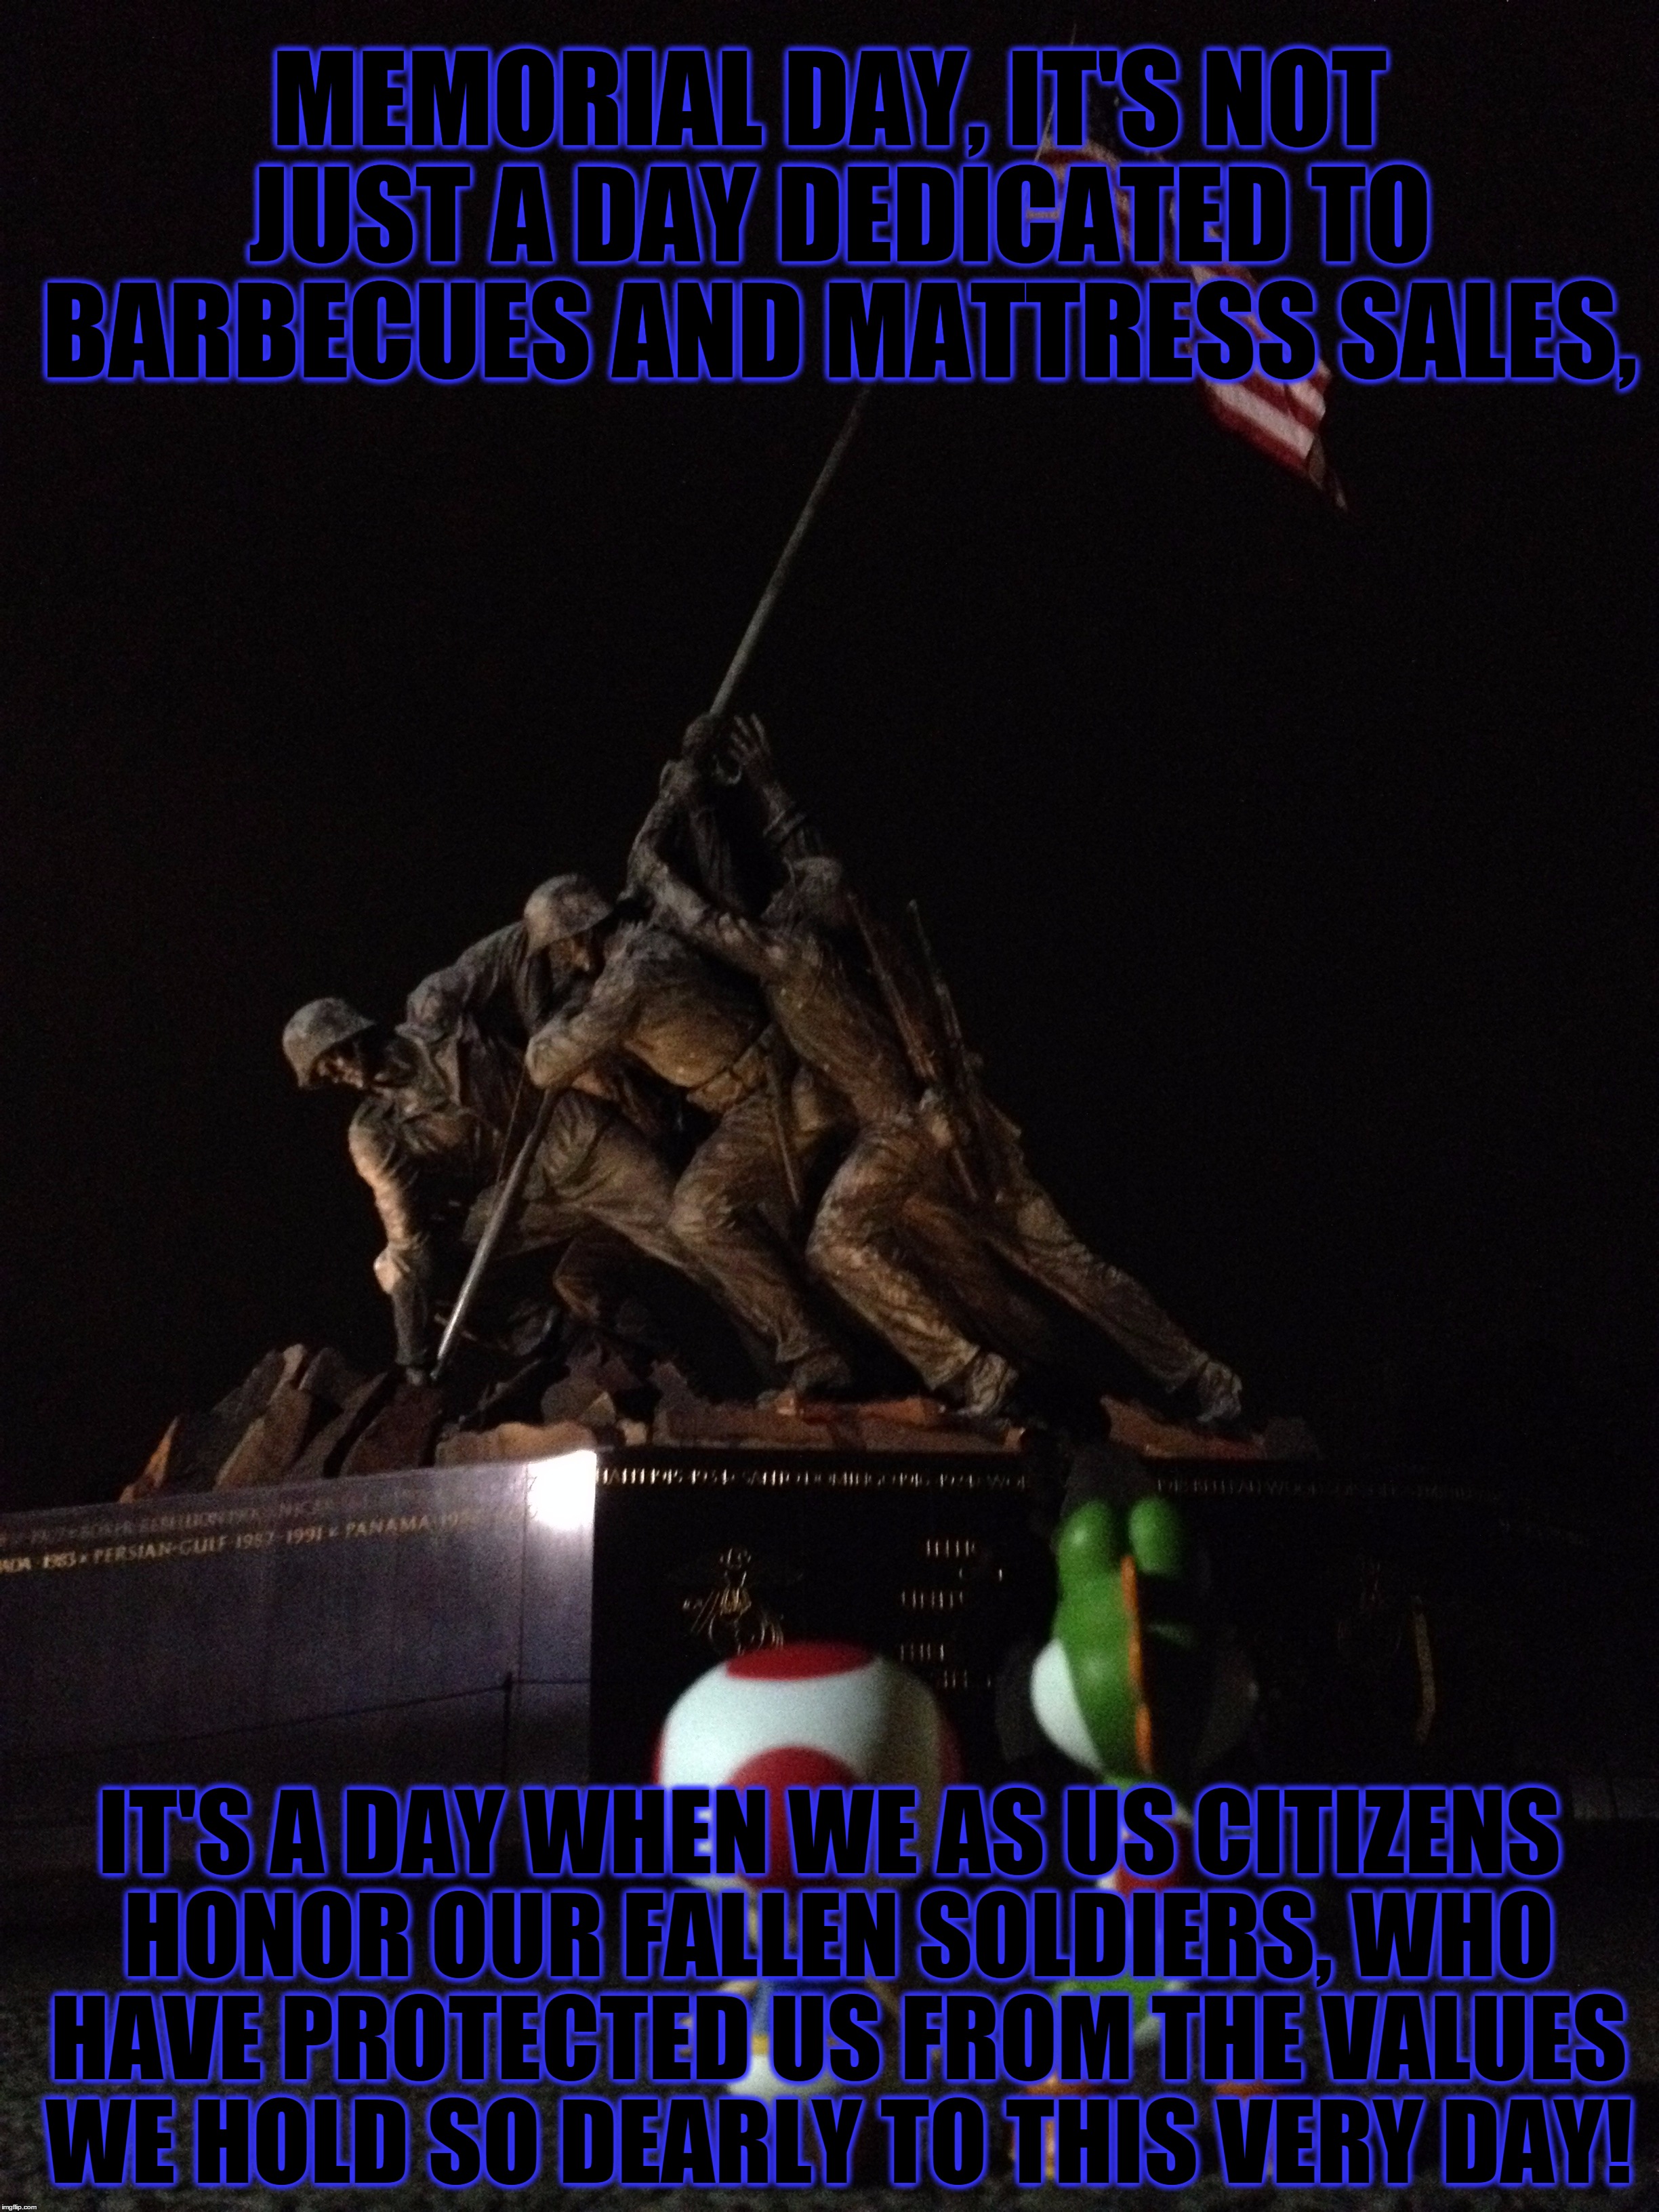 From The Beginnings Of Revolutionary War To The Current Middle Eastern Conflicts, Freedom Isn't Always Free. | MEMORIAL DAY, IT'S NOT JUST A DAY DEDICATED TO BARBECUES AND MATTRESS SALES, IT'S A DAY WHEN WE AS US CITIZENS HONOR OUR FALLEN SOLDIERS, WHO HAVE PROTECTED US FROM THE VALUES WE HOLD SO DEARLY TO THIS VERY DAY! | image tagged in memes,memorial day,usa,fallen soldiers,freedom,thank you | made w/ Imgflip meme maker